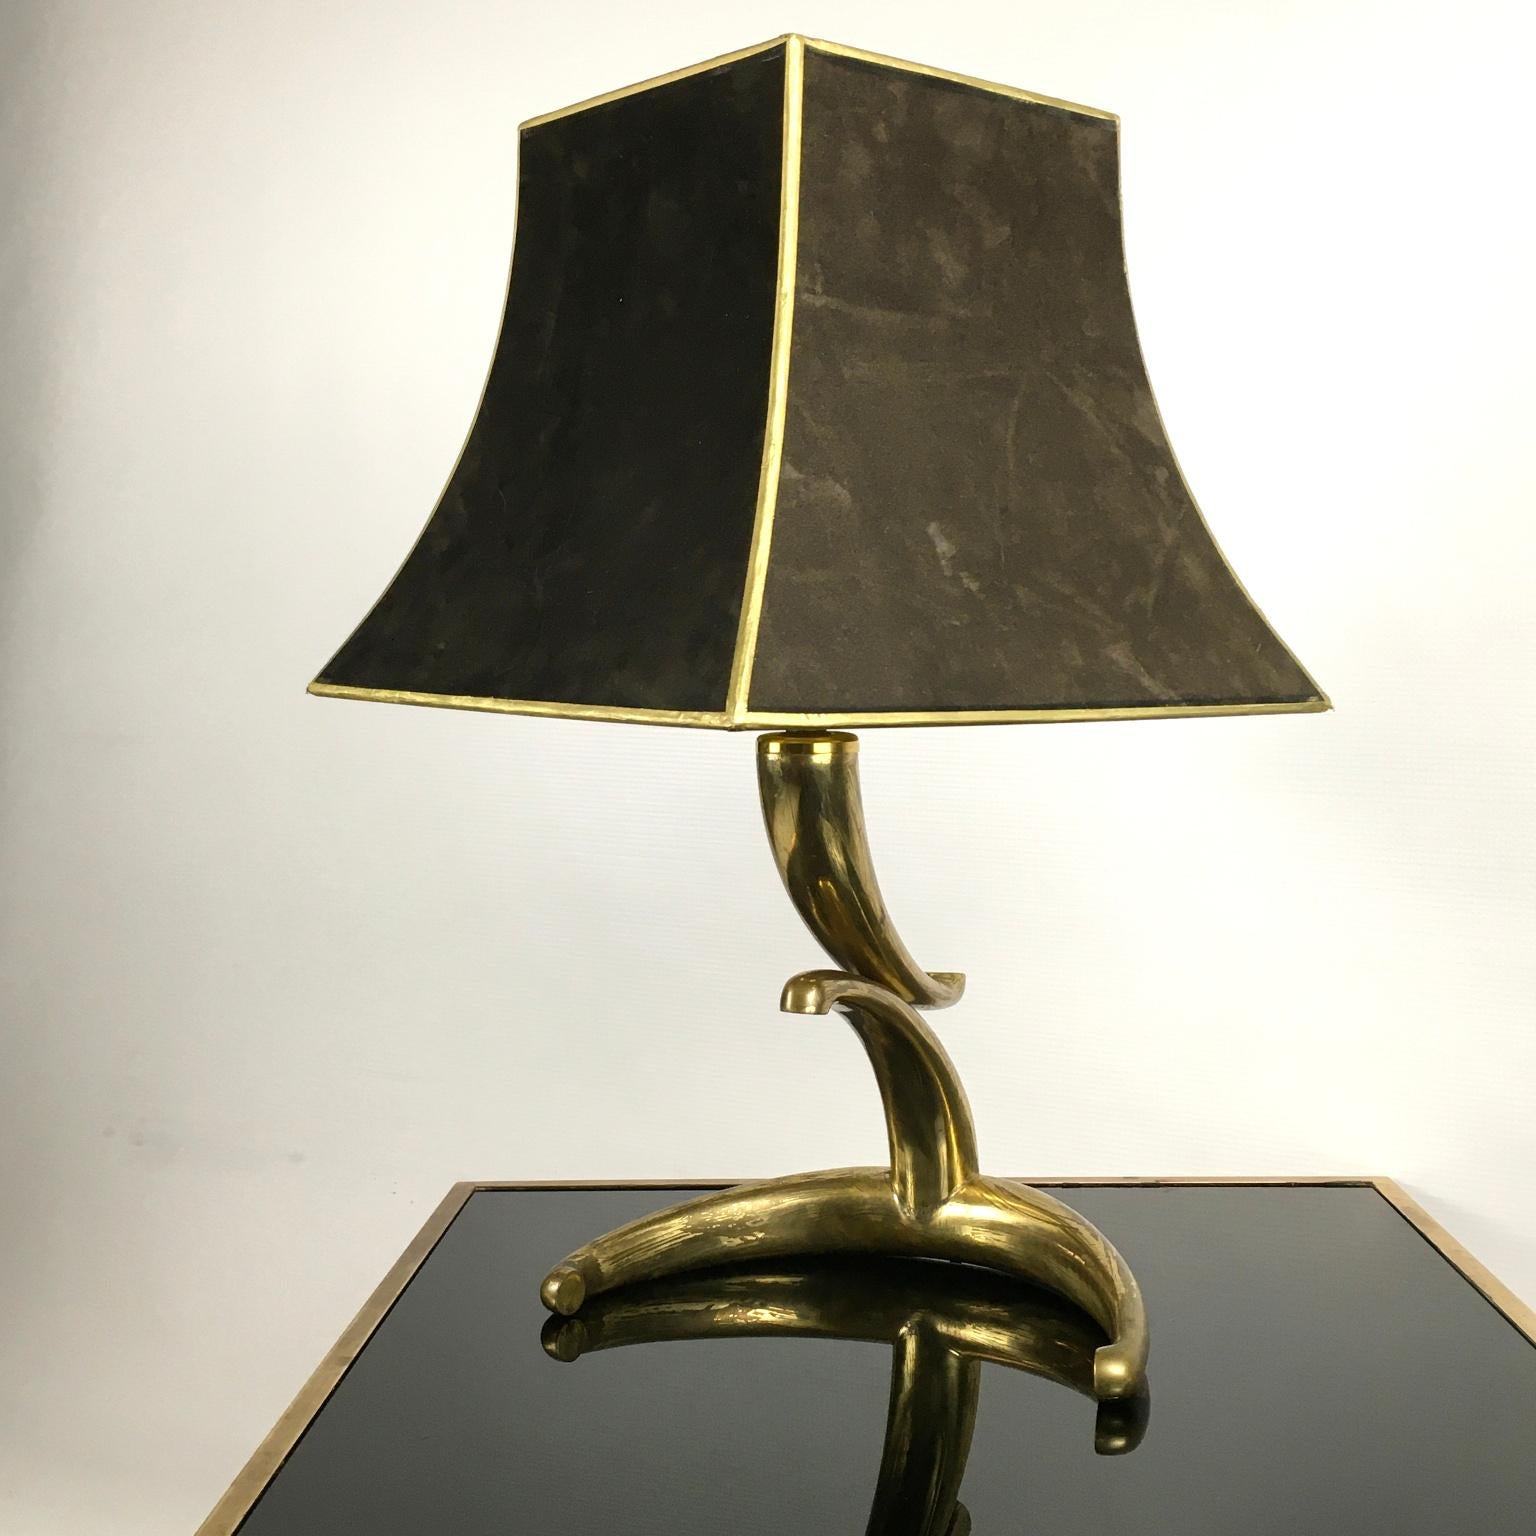 French Horn-shaped brass table lamp from the 1970s with its original lampshade in brown and gold velvet.
Zoomorphic base in solid brass is reminiscent of the Greek Cornucopia.
In a manner of Maison Jansen, unattributed designer
Table lamp